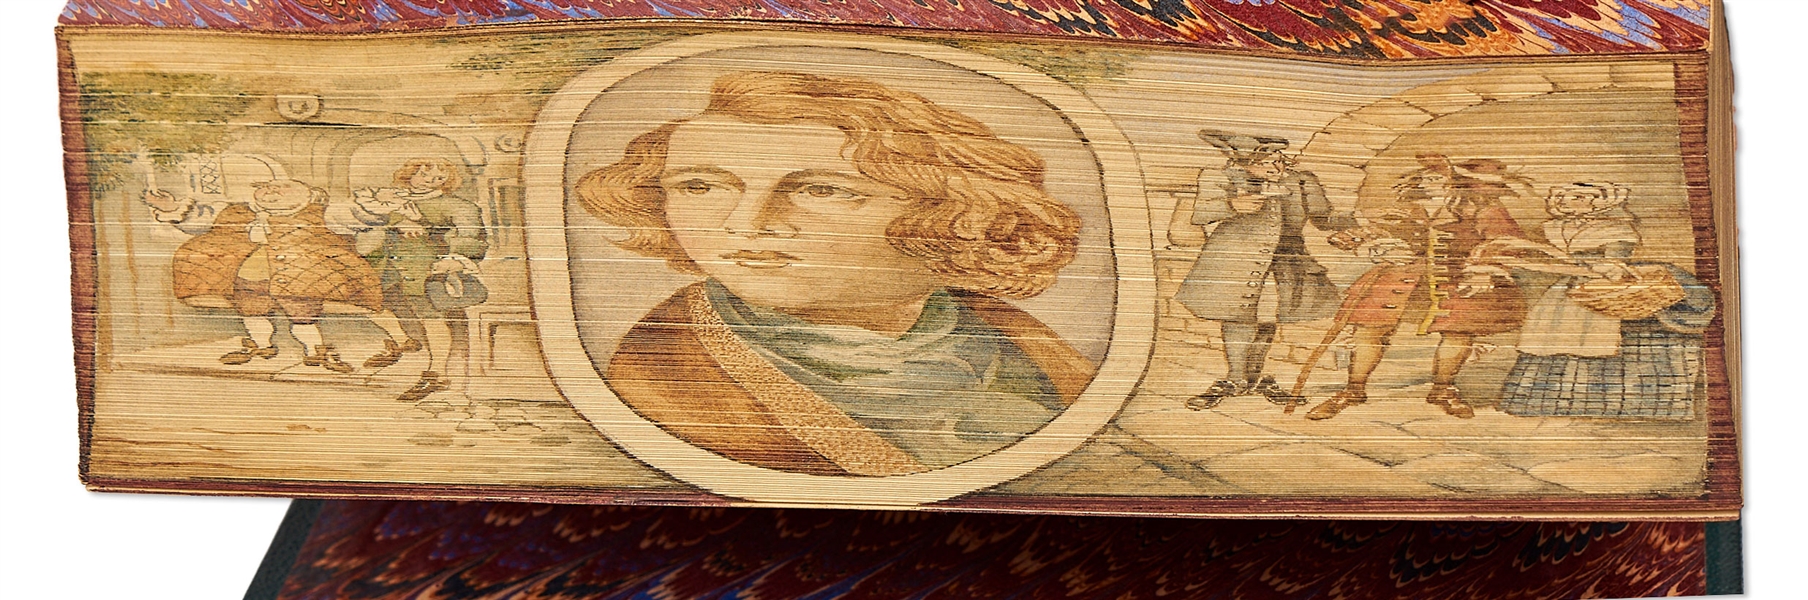 Fore-Edge Painting of Charles Dickens and Scenes from the Novel ''Barnaby Rudge''